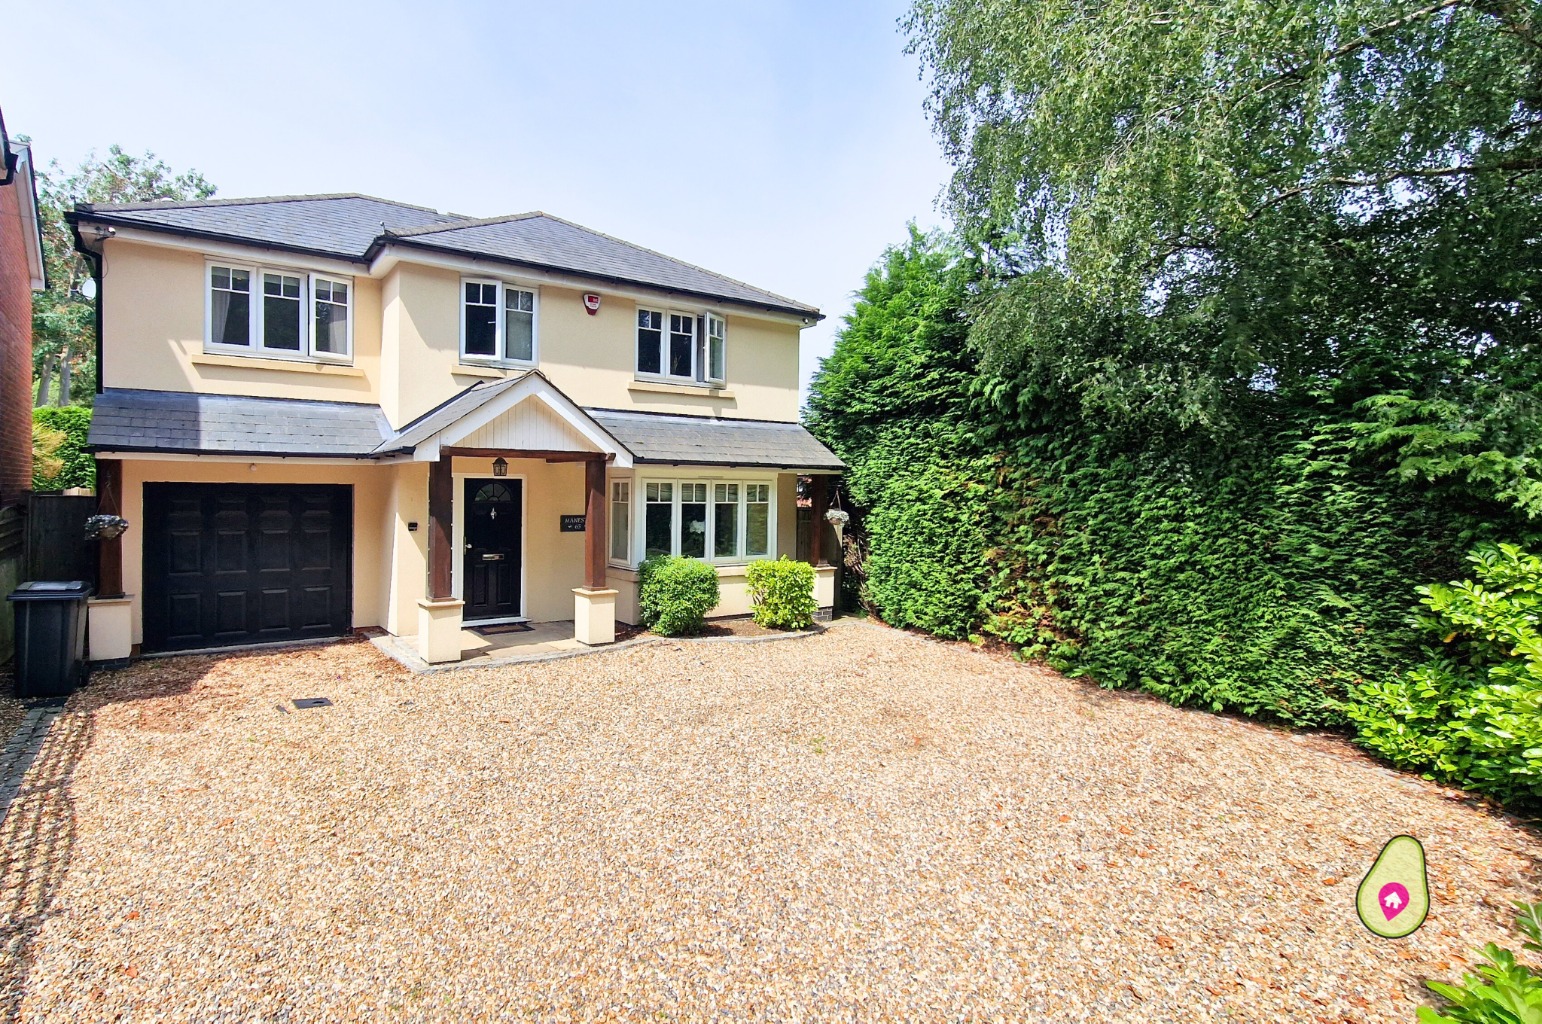 4 bed detached house for sale in Old Wokingham Road, Crowthorne - Property Image 1